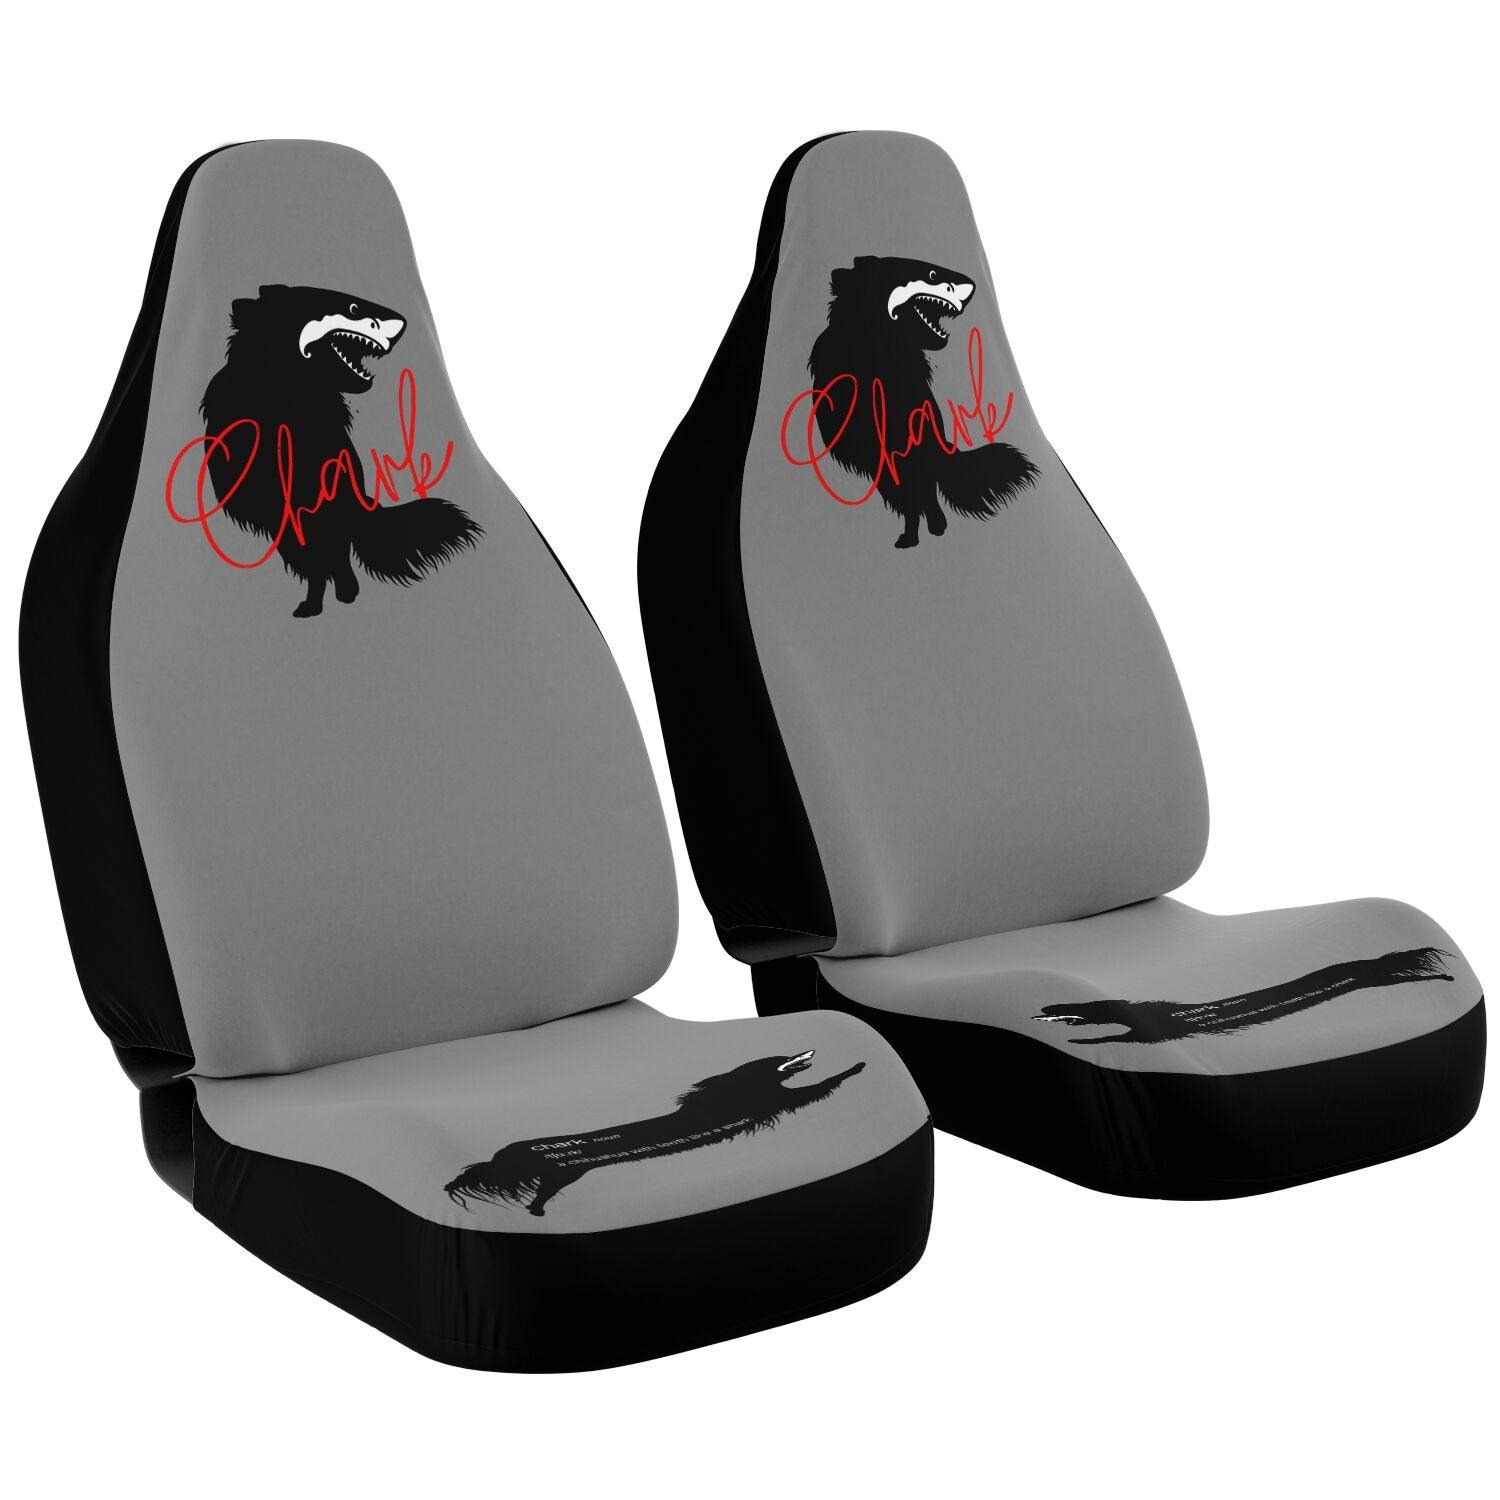 This punky pair of grey front car seat covers feature the silhouette of a black longhair chihuahua with the face of a great white shark - mouth open to show off jaws lined with sharp teeth.  The word "Chark" is artfully placed in red cursive font over the image. The seat fronts feature another shark-faced chihuahua, and a "dictionary entry" of the noun "chark": a chihuahua with teeth like a shark. Design by Renate Kriegler for Chimigos.